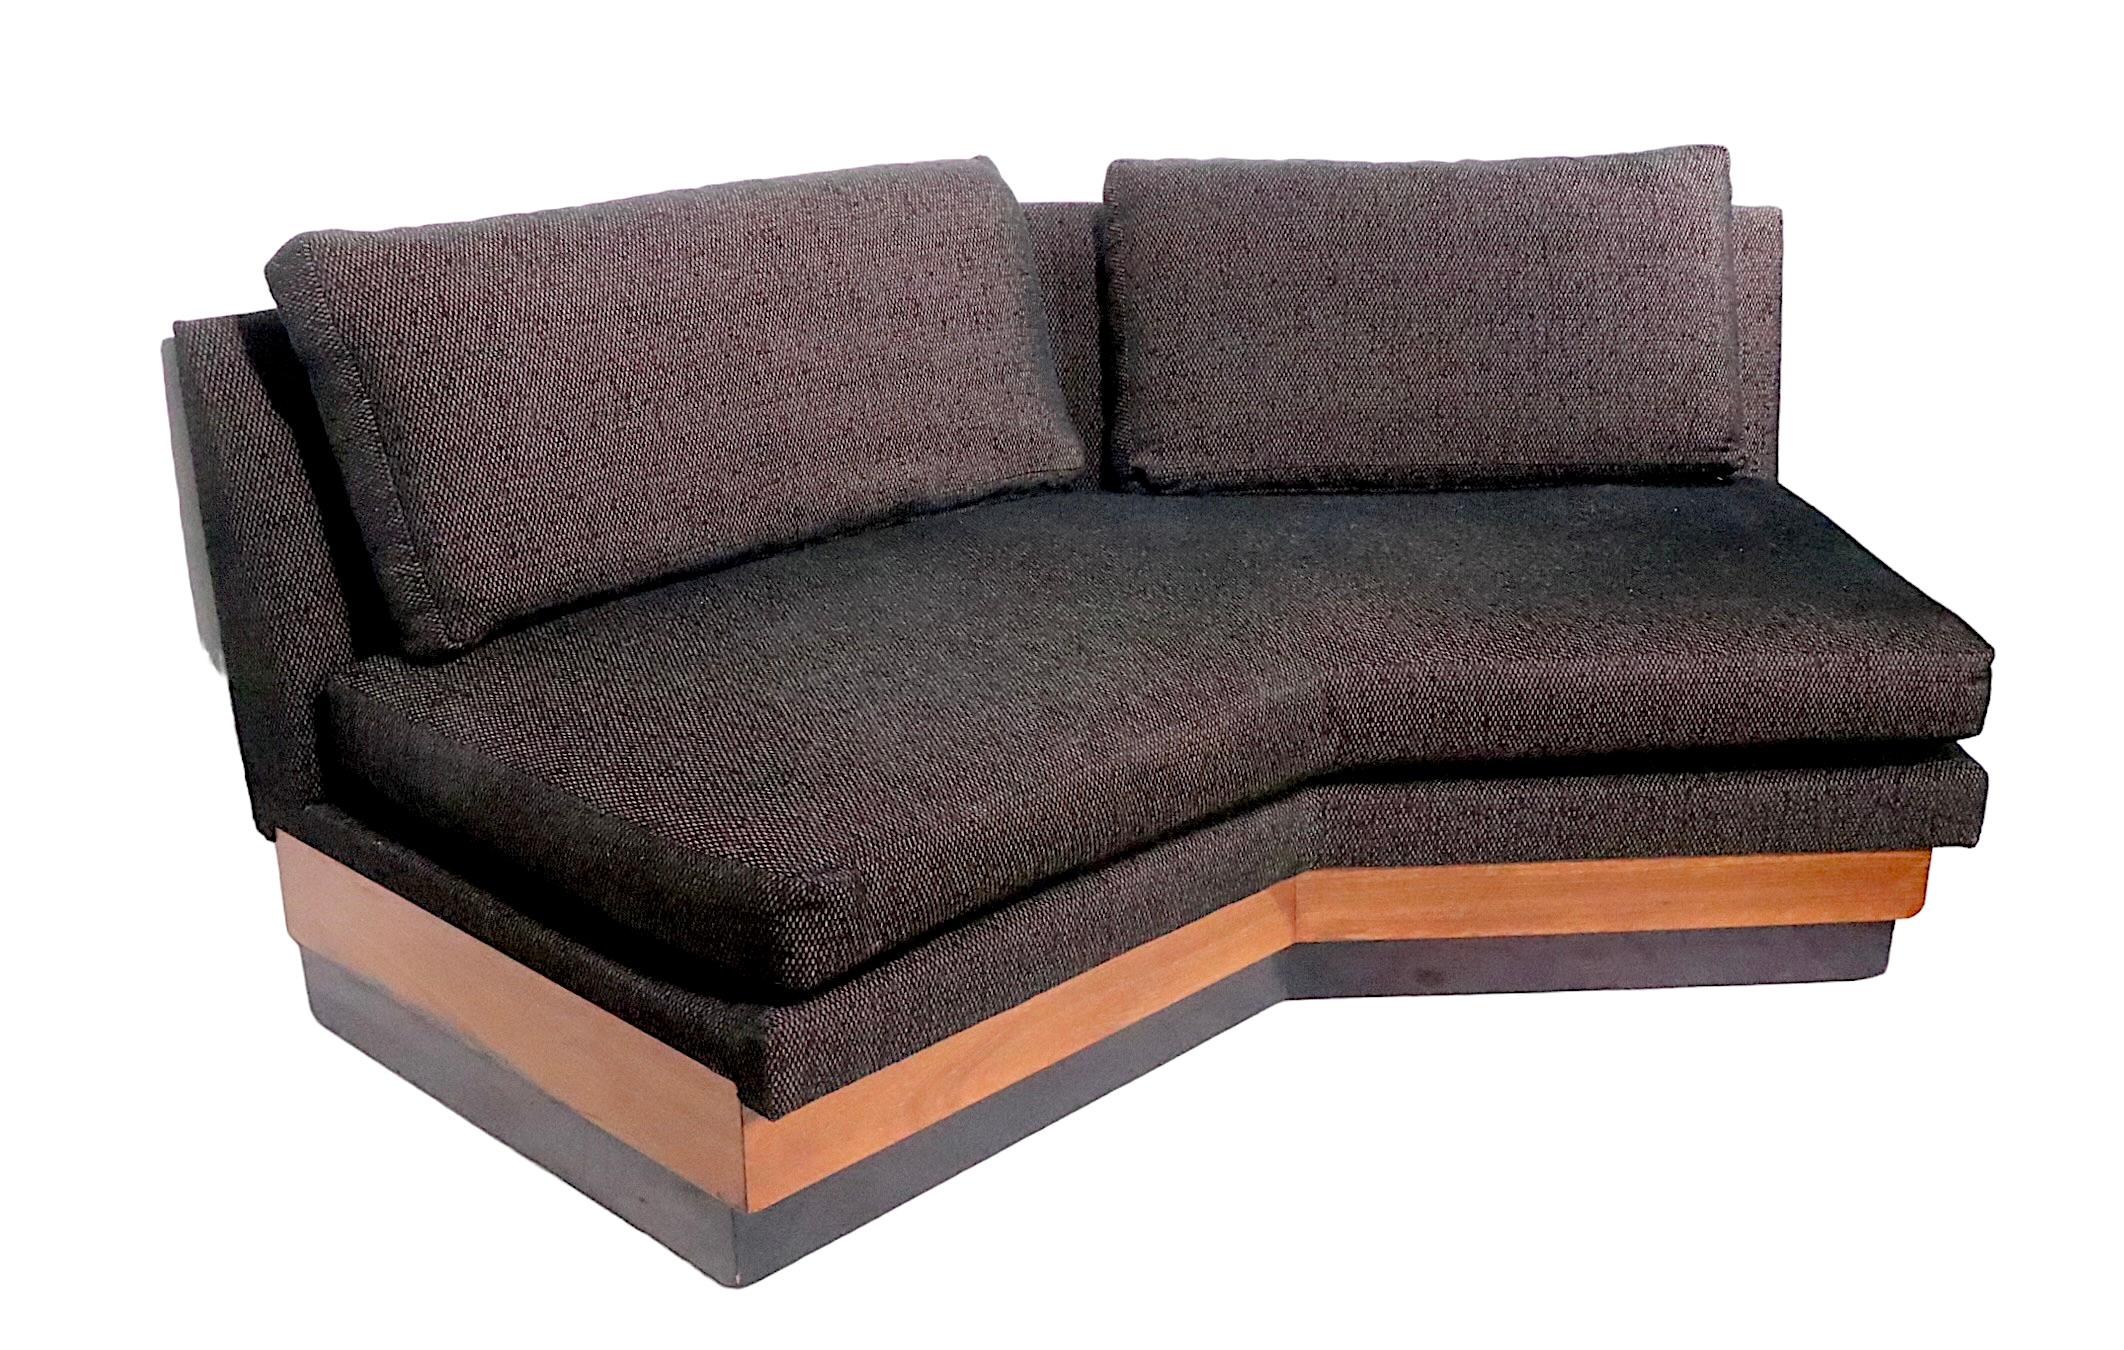 Mid Century Sectional Sofa by Adrian Pearsall for Craft Associates c 1960's For Sale 6